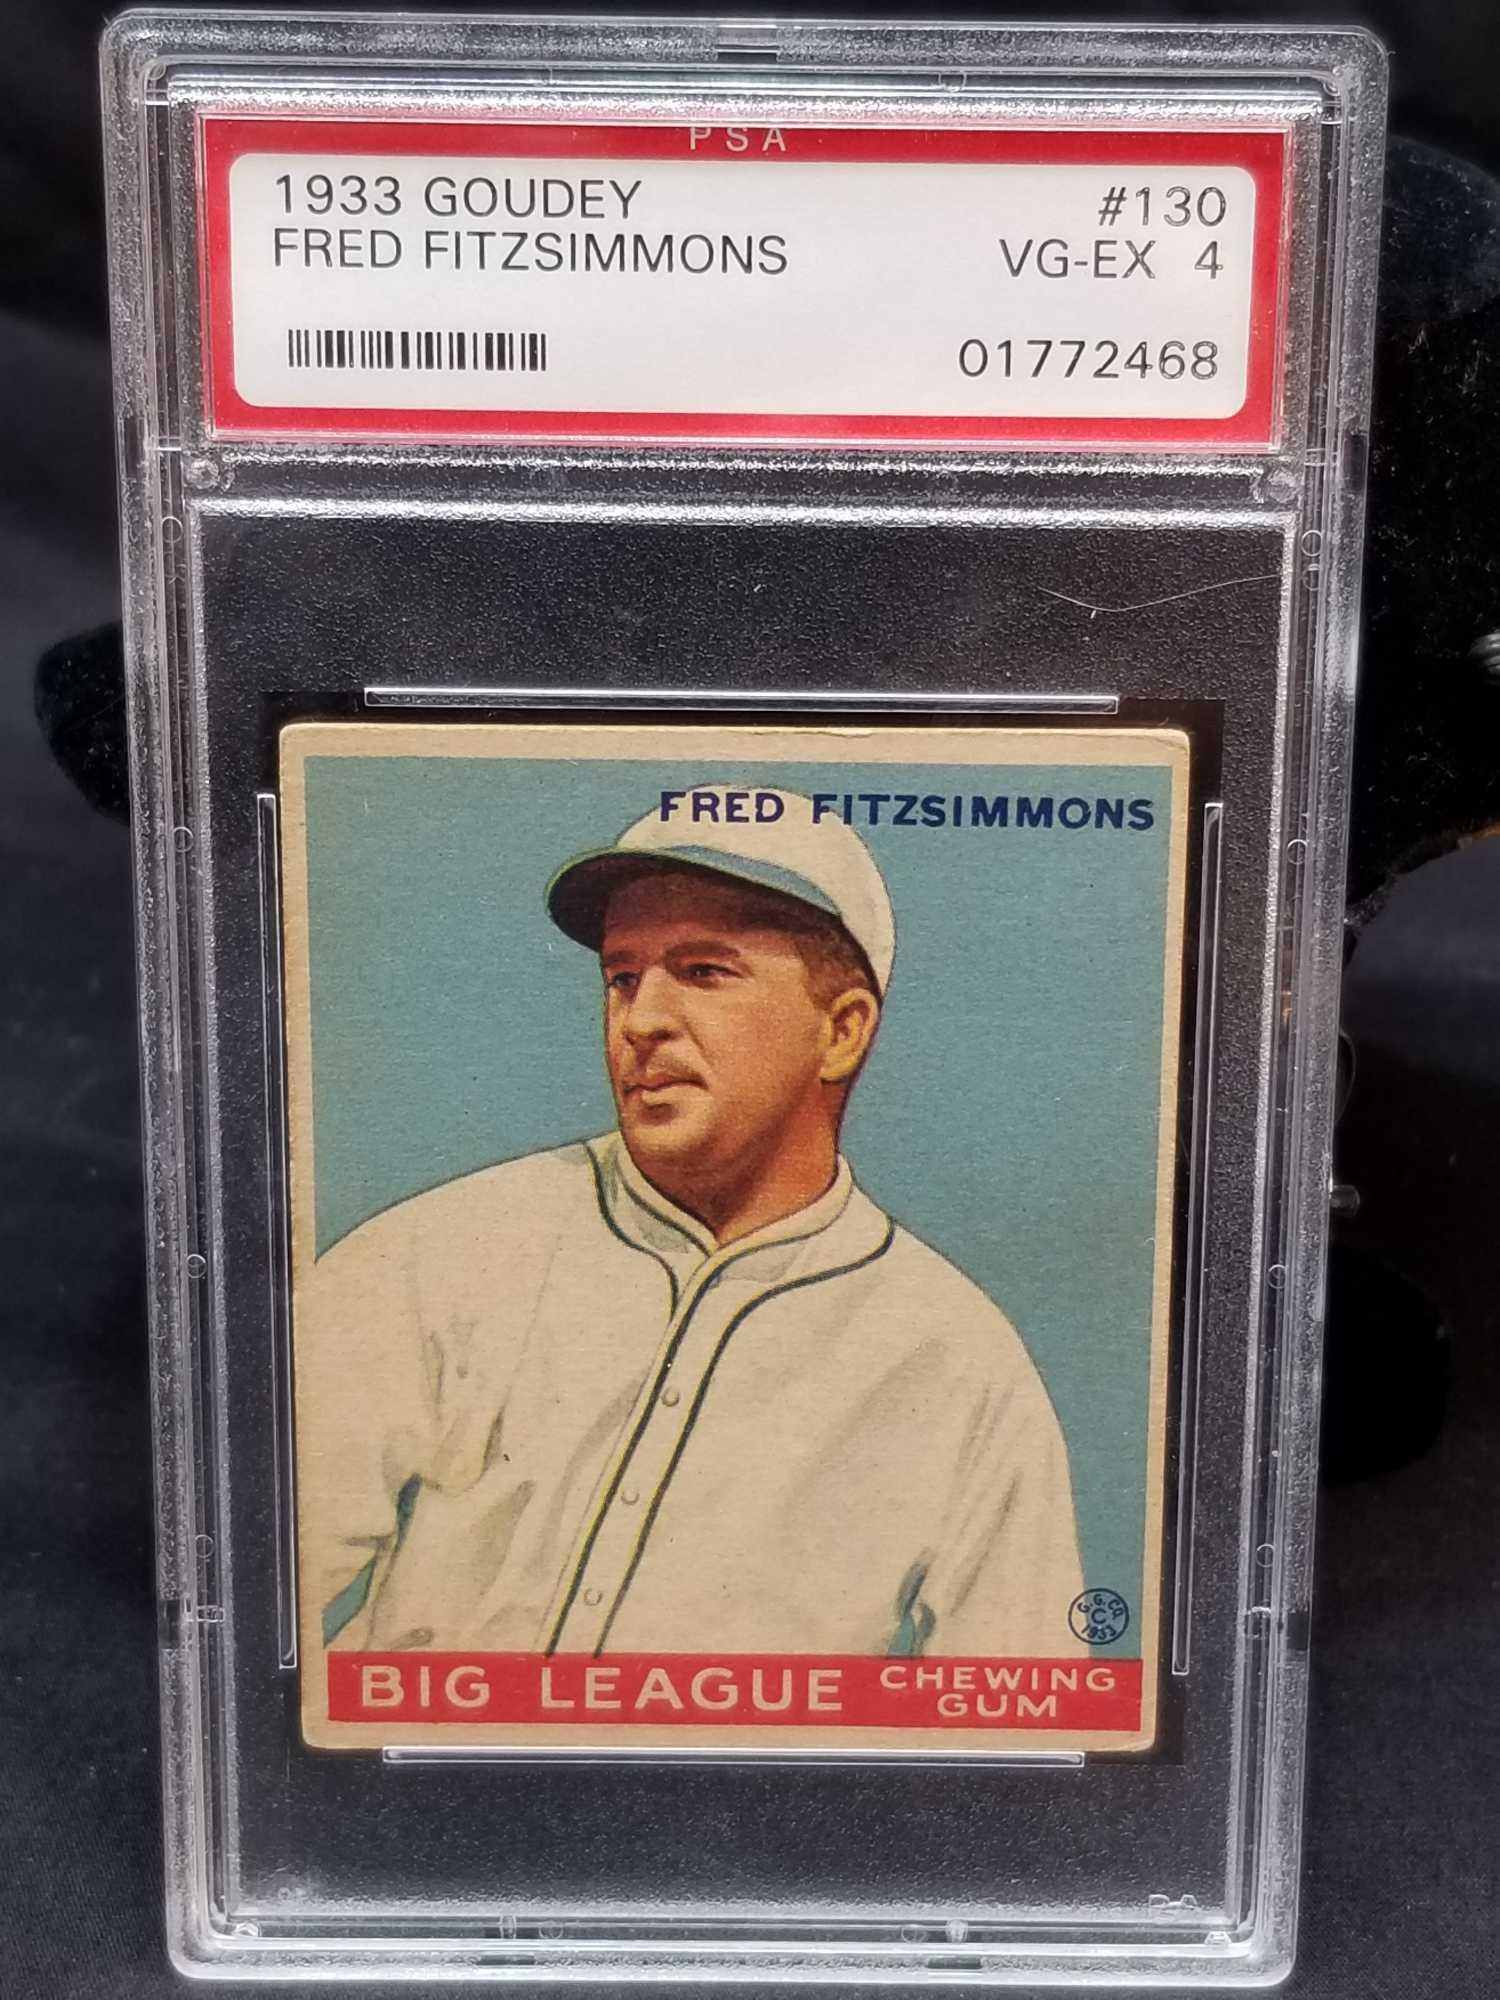 1933 Goudey Red PSA #130 Fred Fitzsimmons VG-EX4